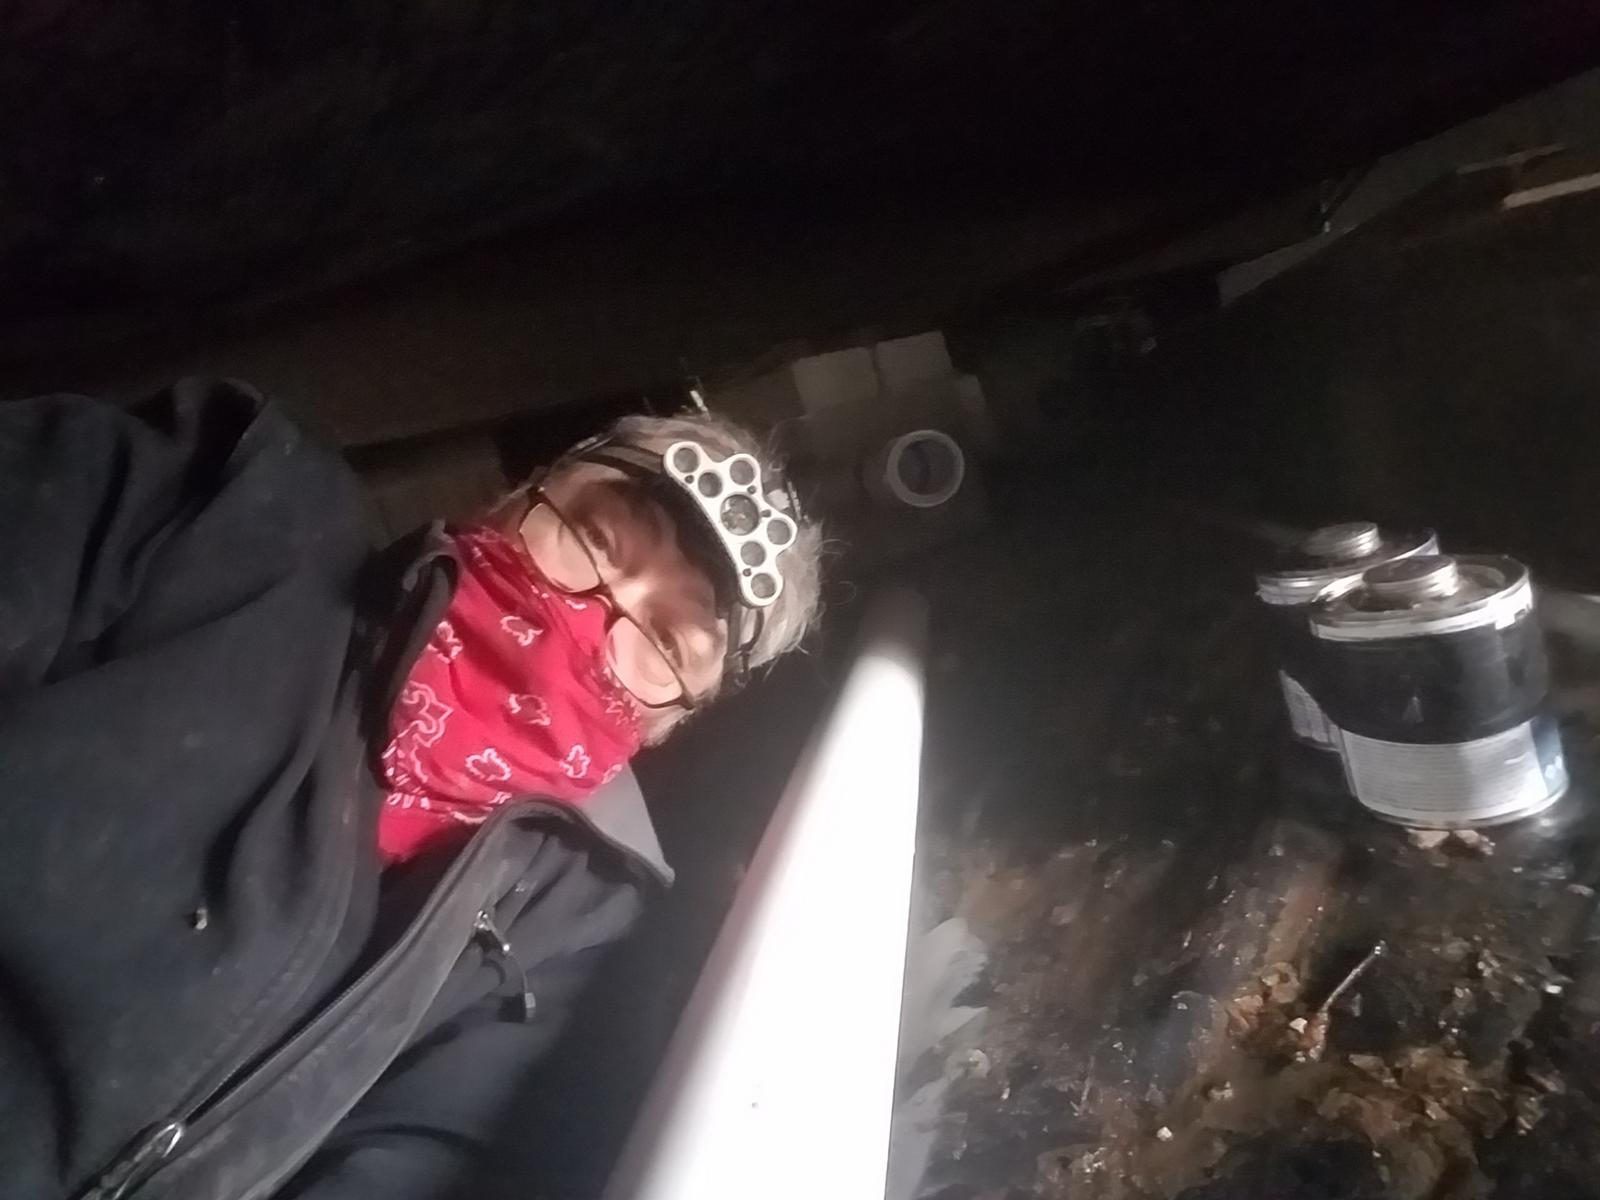 Another busted main sewer line under a house. The bandana didn\'t help with the smell!